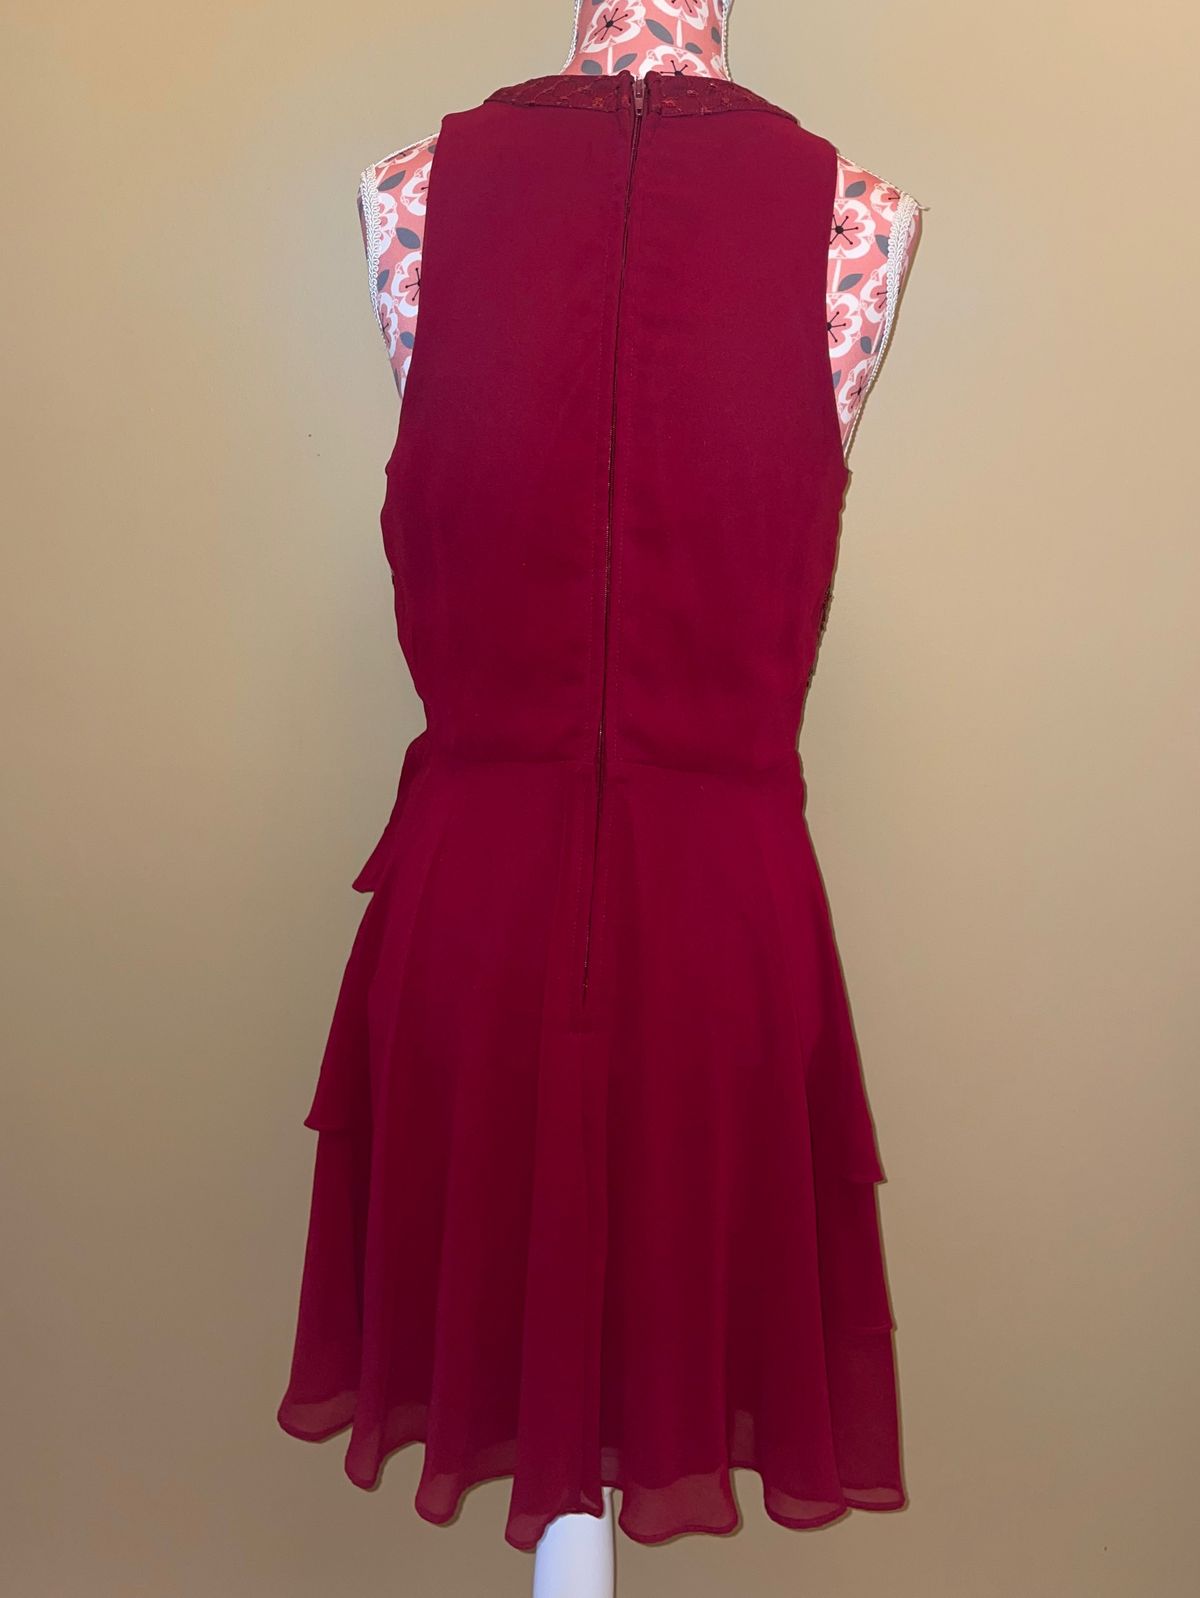 City Studios Size 4 Prom High Neck Satin Red Cocktail Dress on Queenly